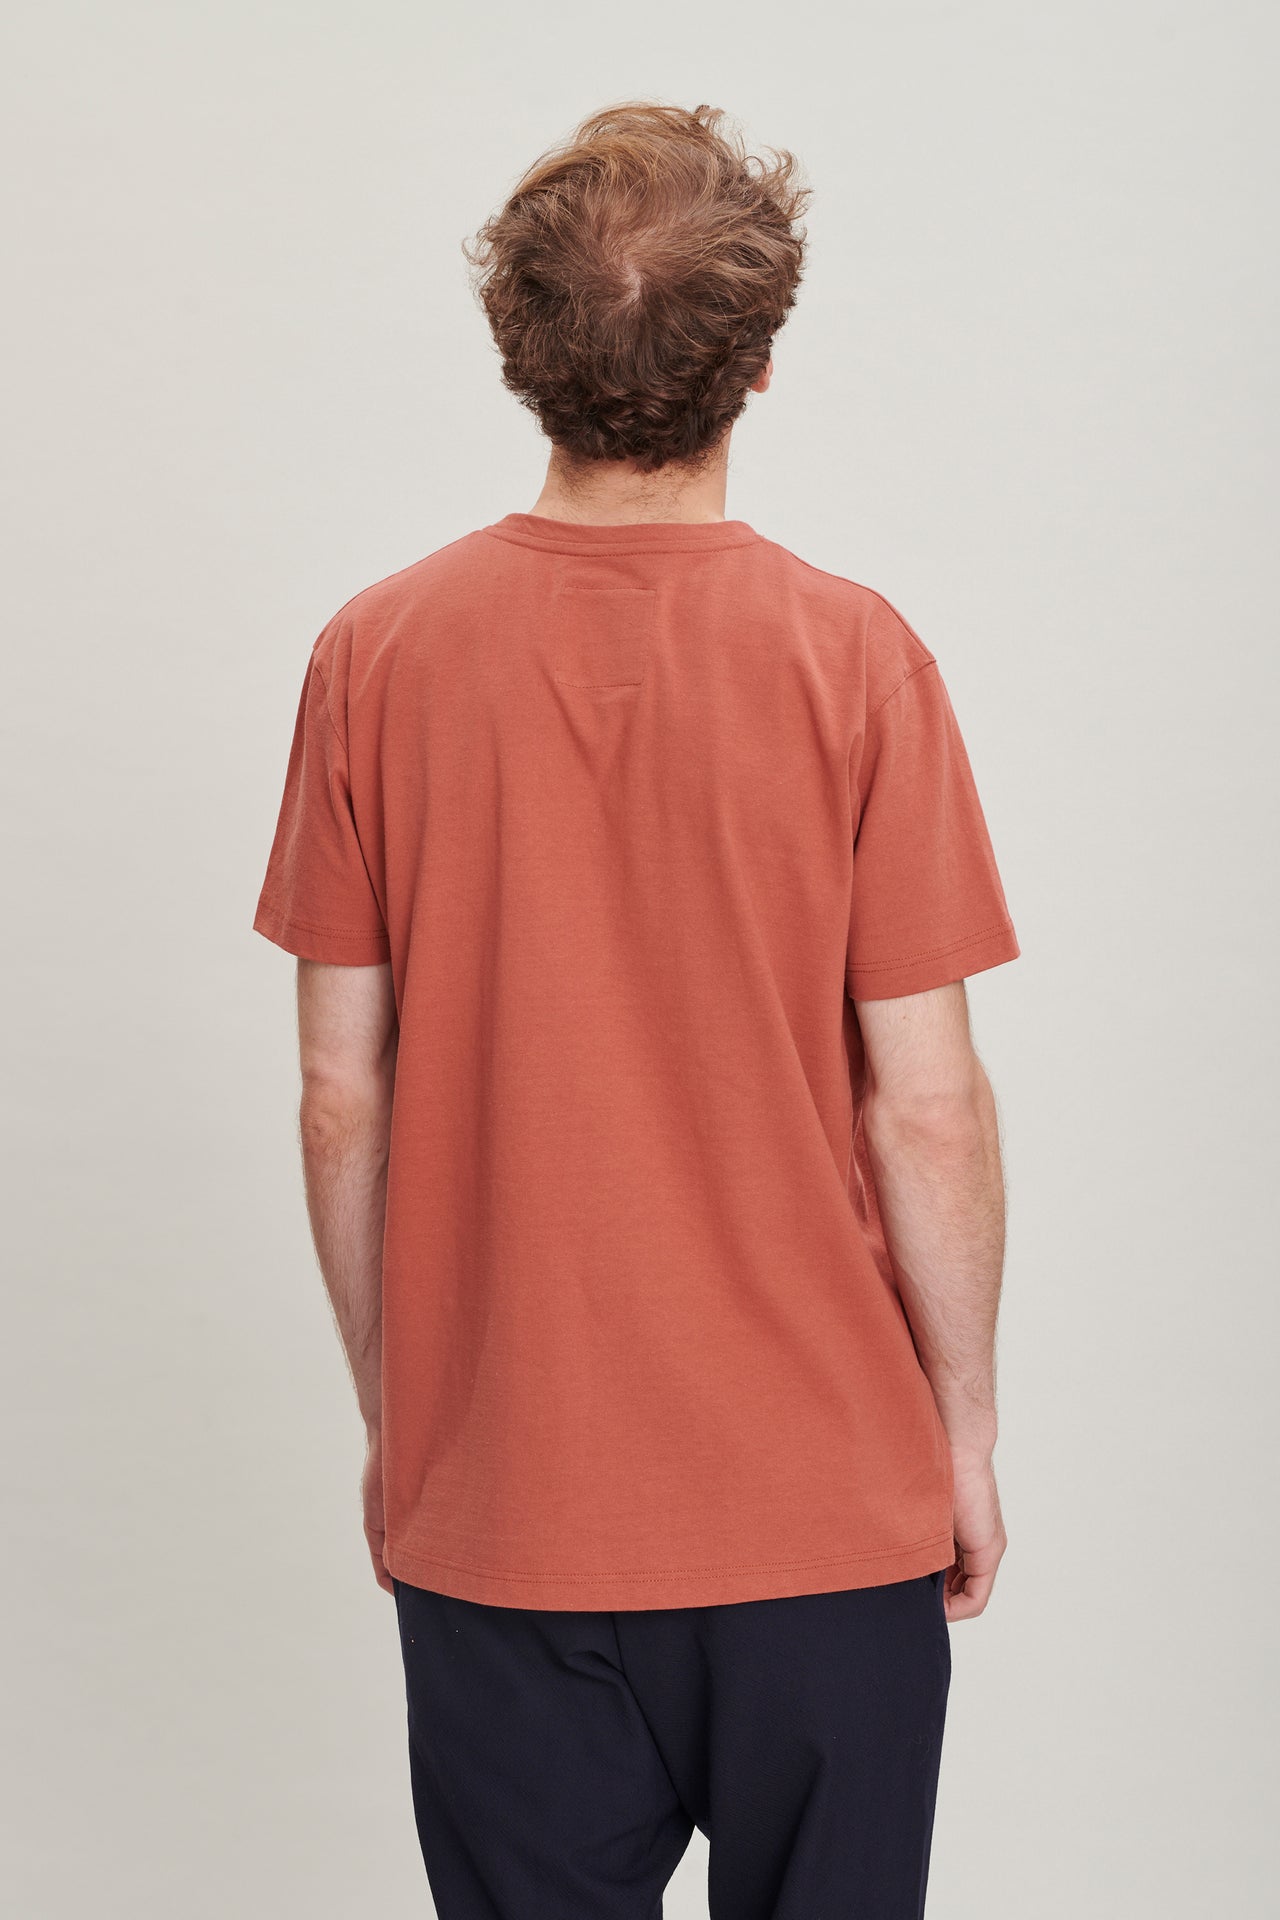 T-Shirt in a Rusty Japanese Cotton Jersey